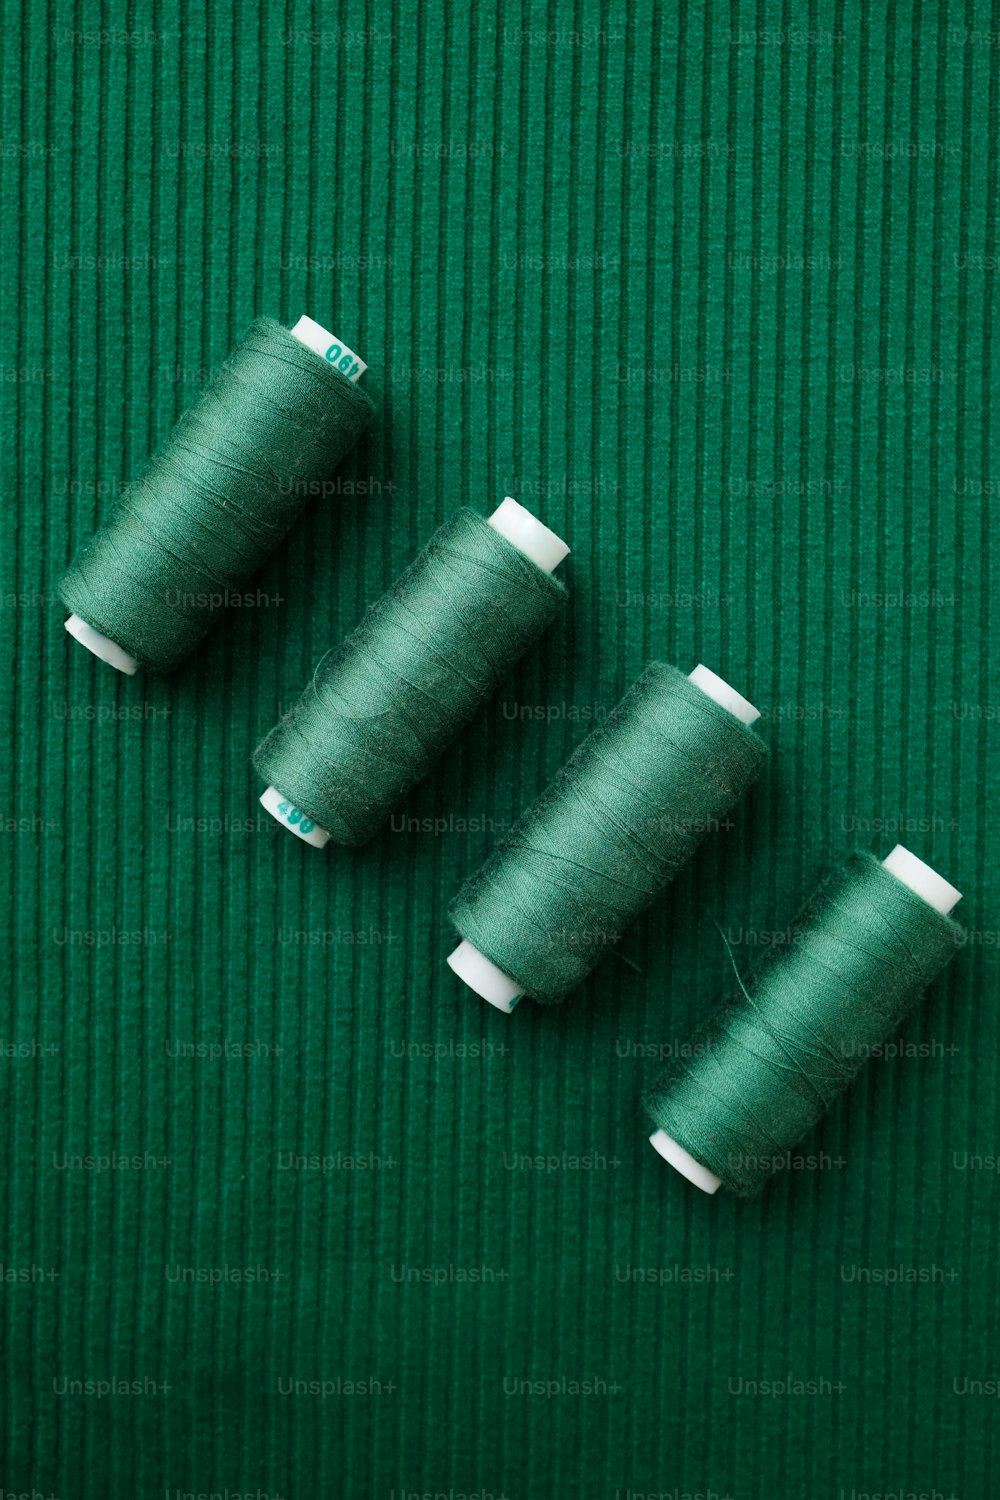 three spools of thread sitting on a green surface